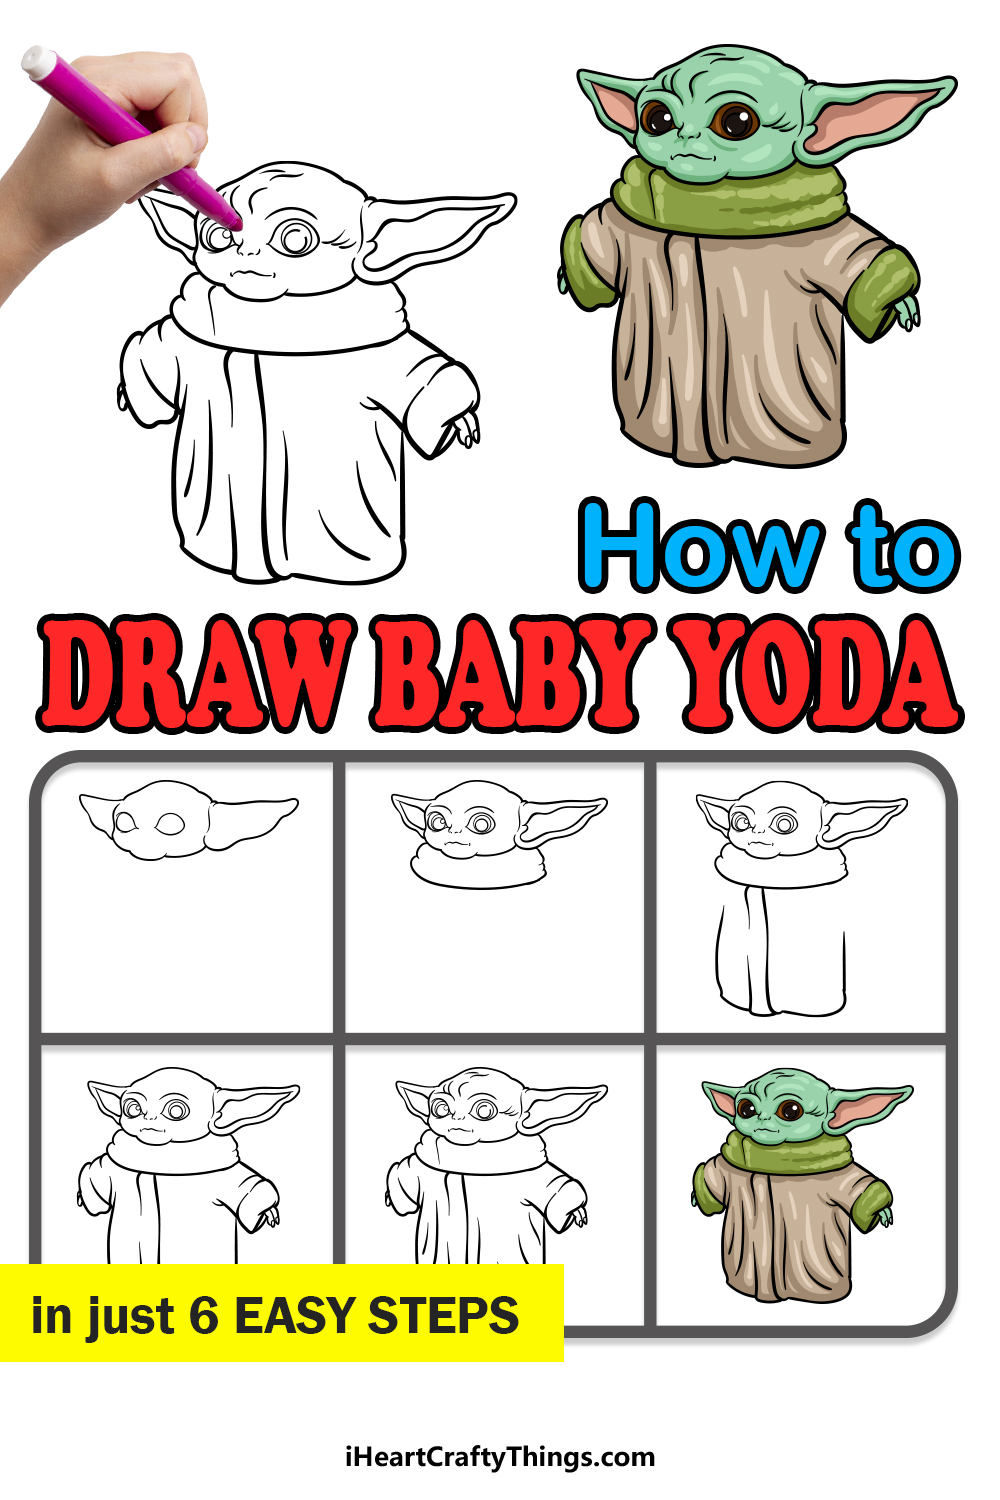 how to draw Baby Yoda in 6 easy steps